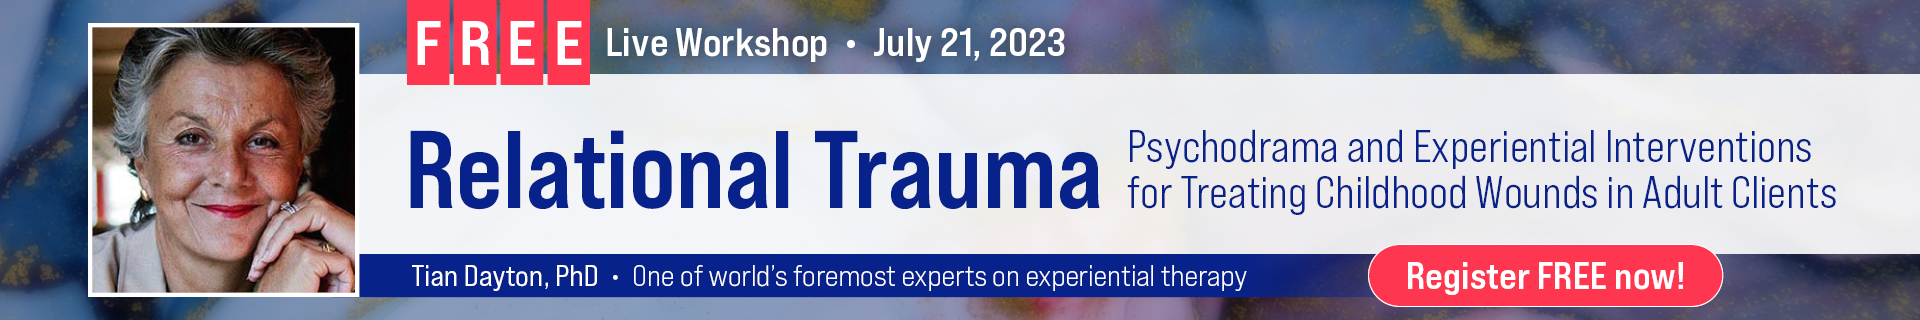 Relational Trauma Treatment Workshop: Processing Deep Childhood Wounds with Psychodrama and Experiential Interventions